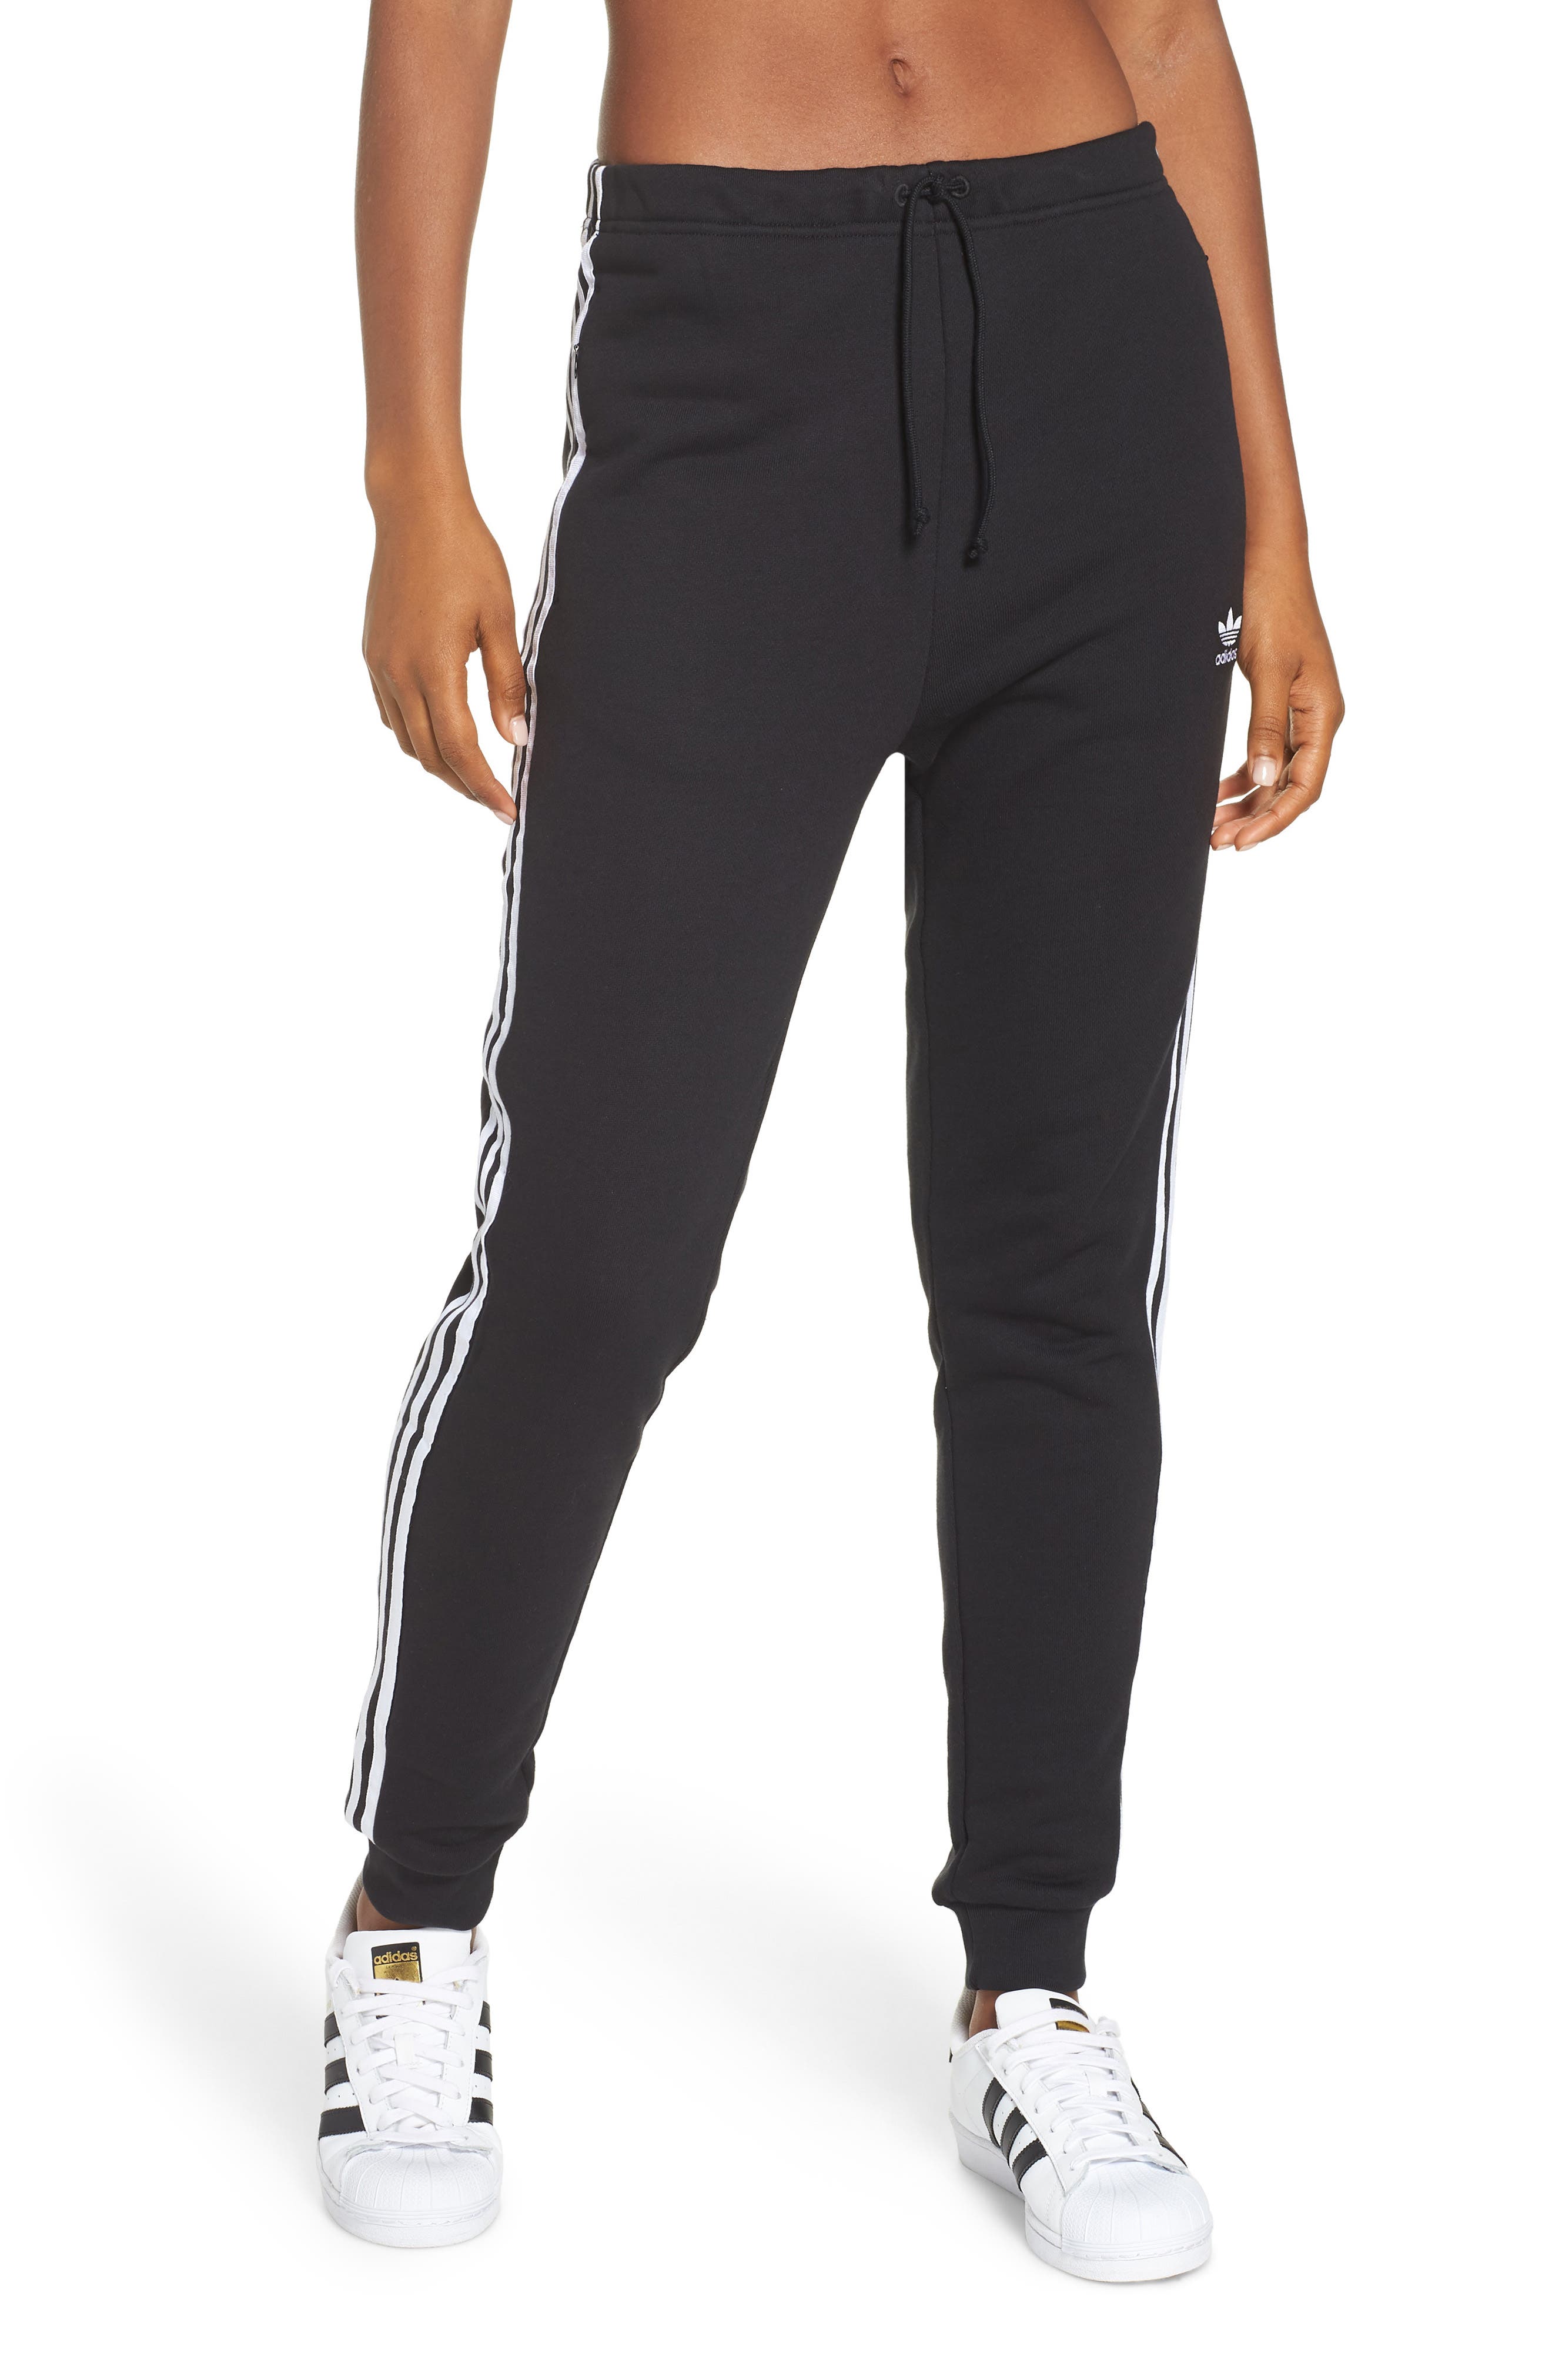 shoes to wear with adidas track pants